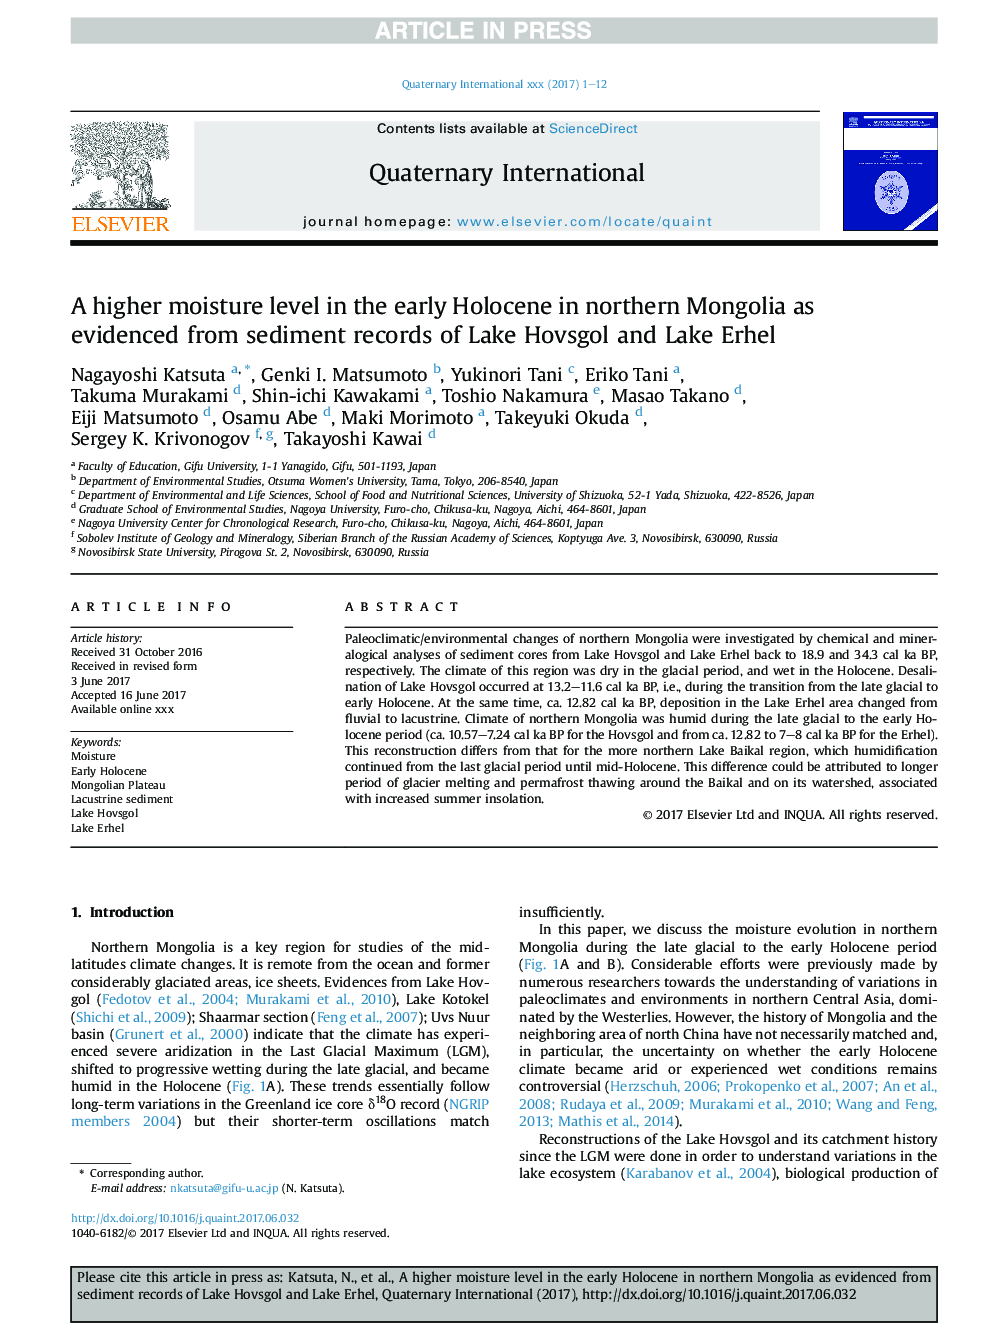 A higher moisture level in the early Holocene in northern Mongolia as evidenced from sediment records of Lake Hovsgol and Lake Erhel